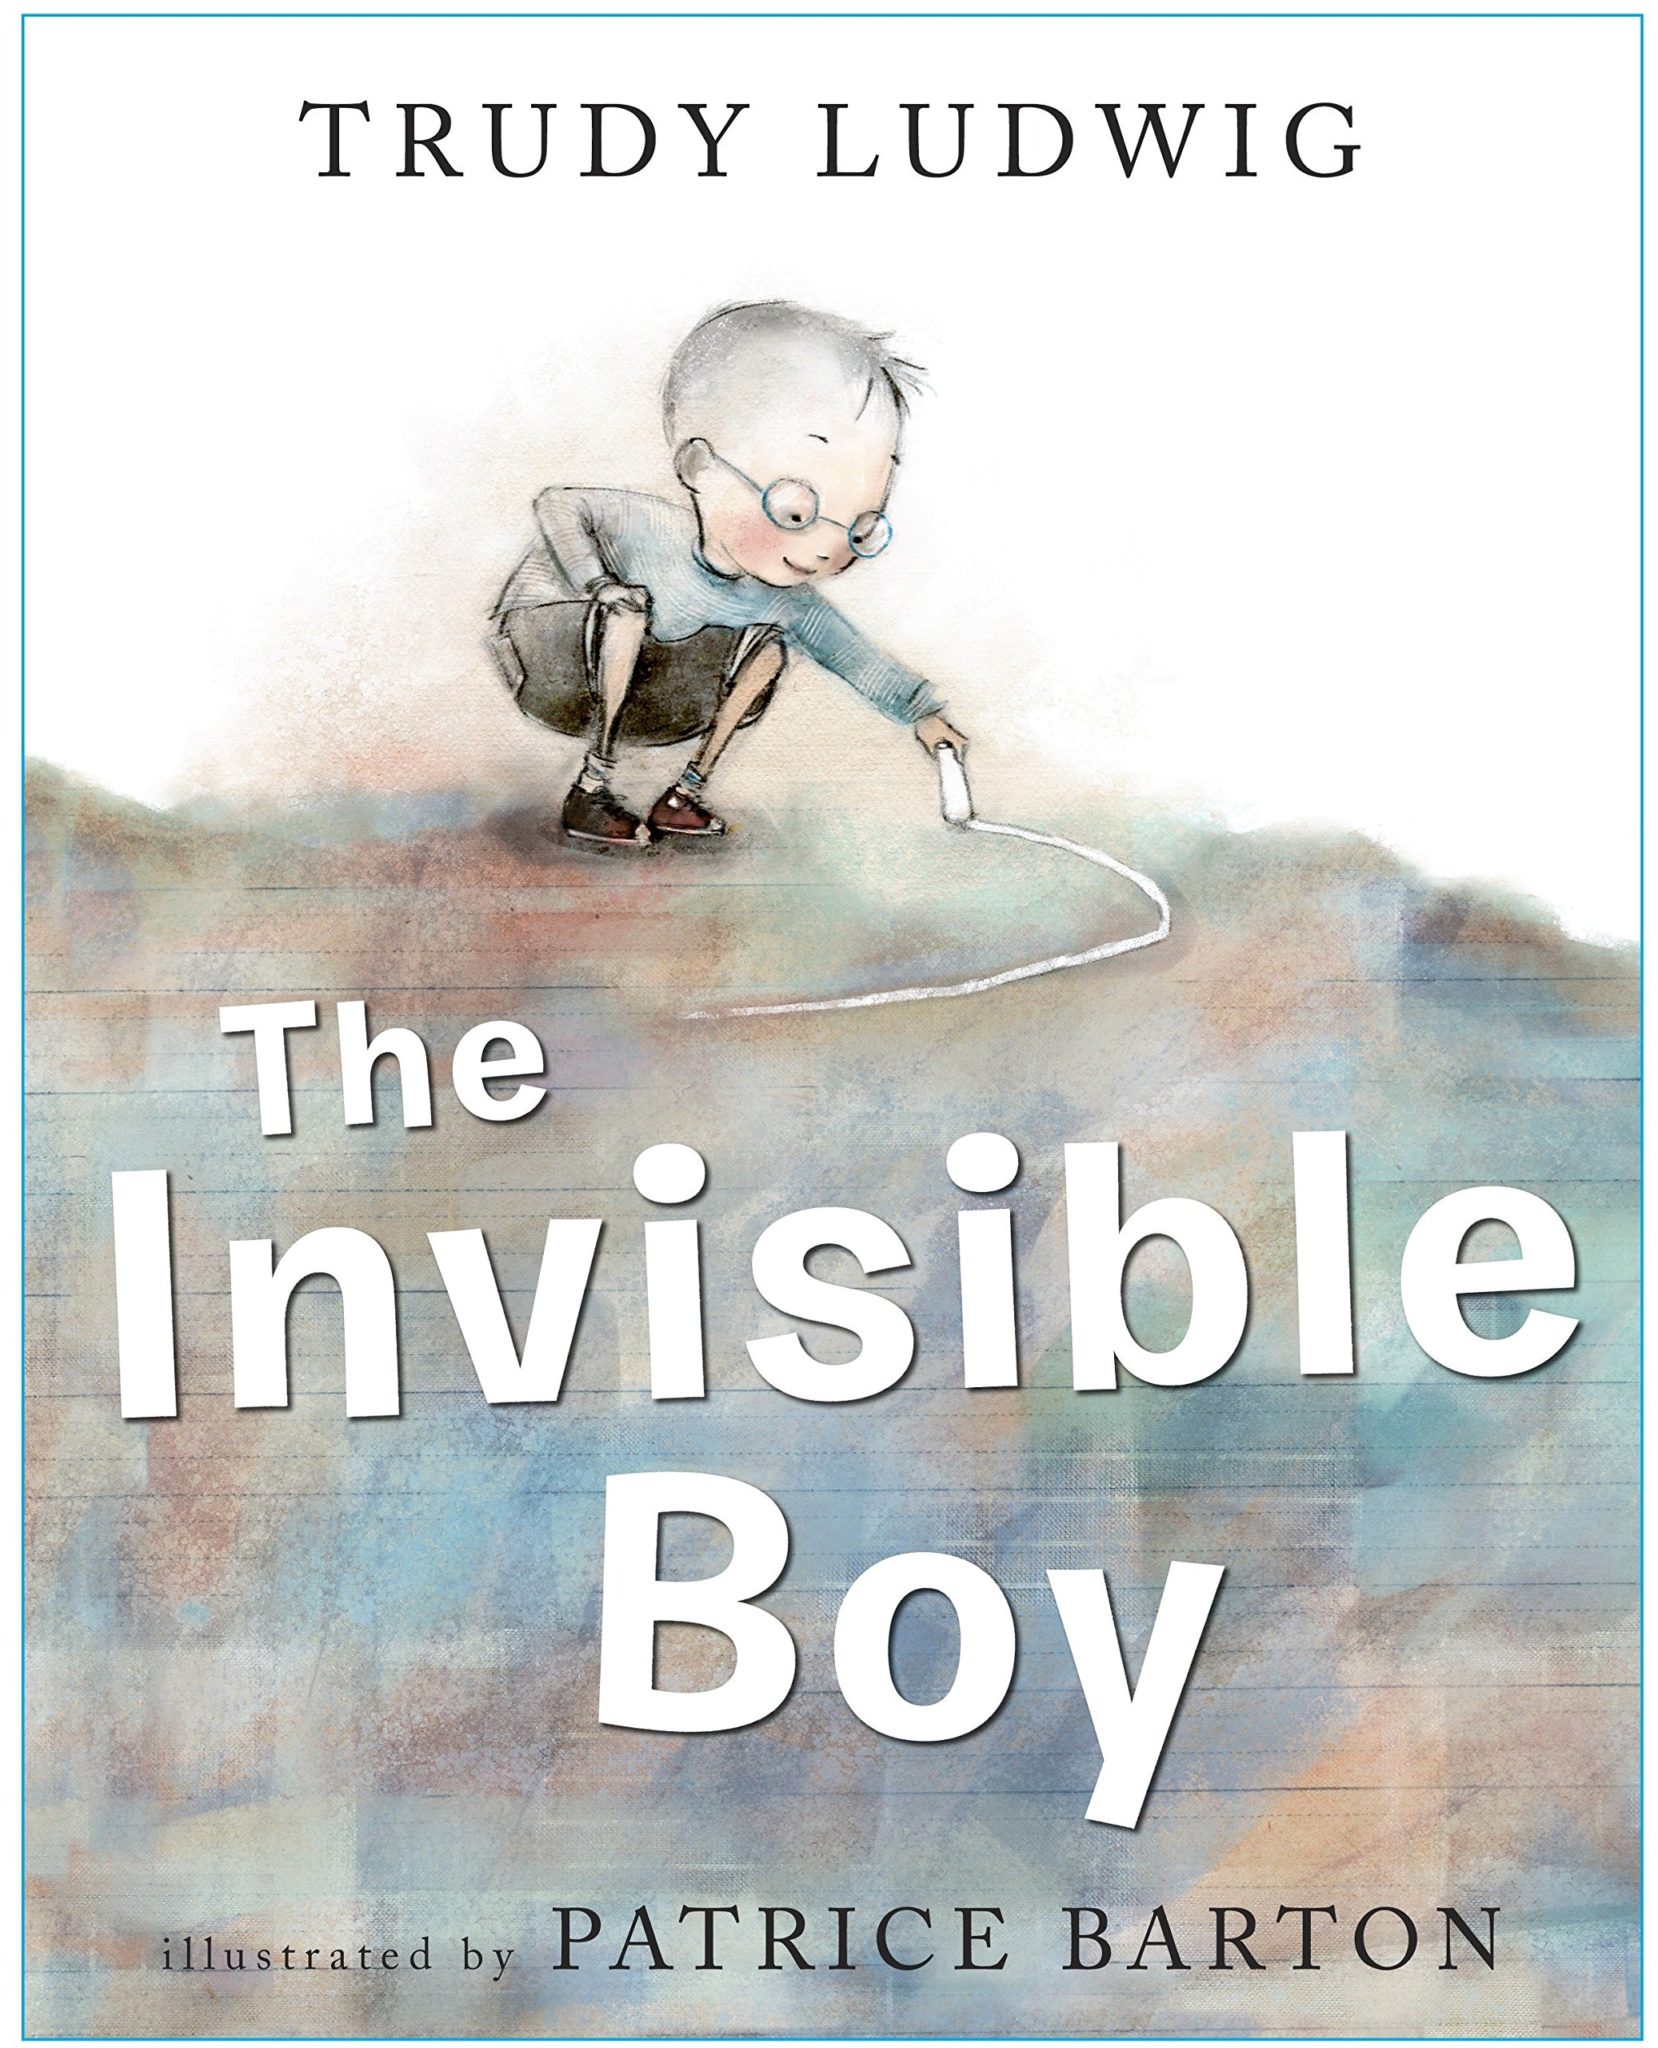 The cover of the picture book "The Invisible Boy" features a small, bespectacled boy crouching down to draw with chalk on the ground.